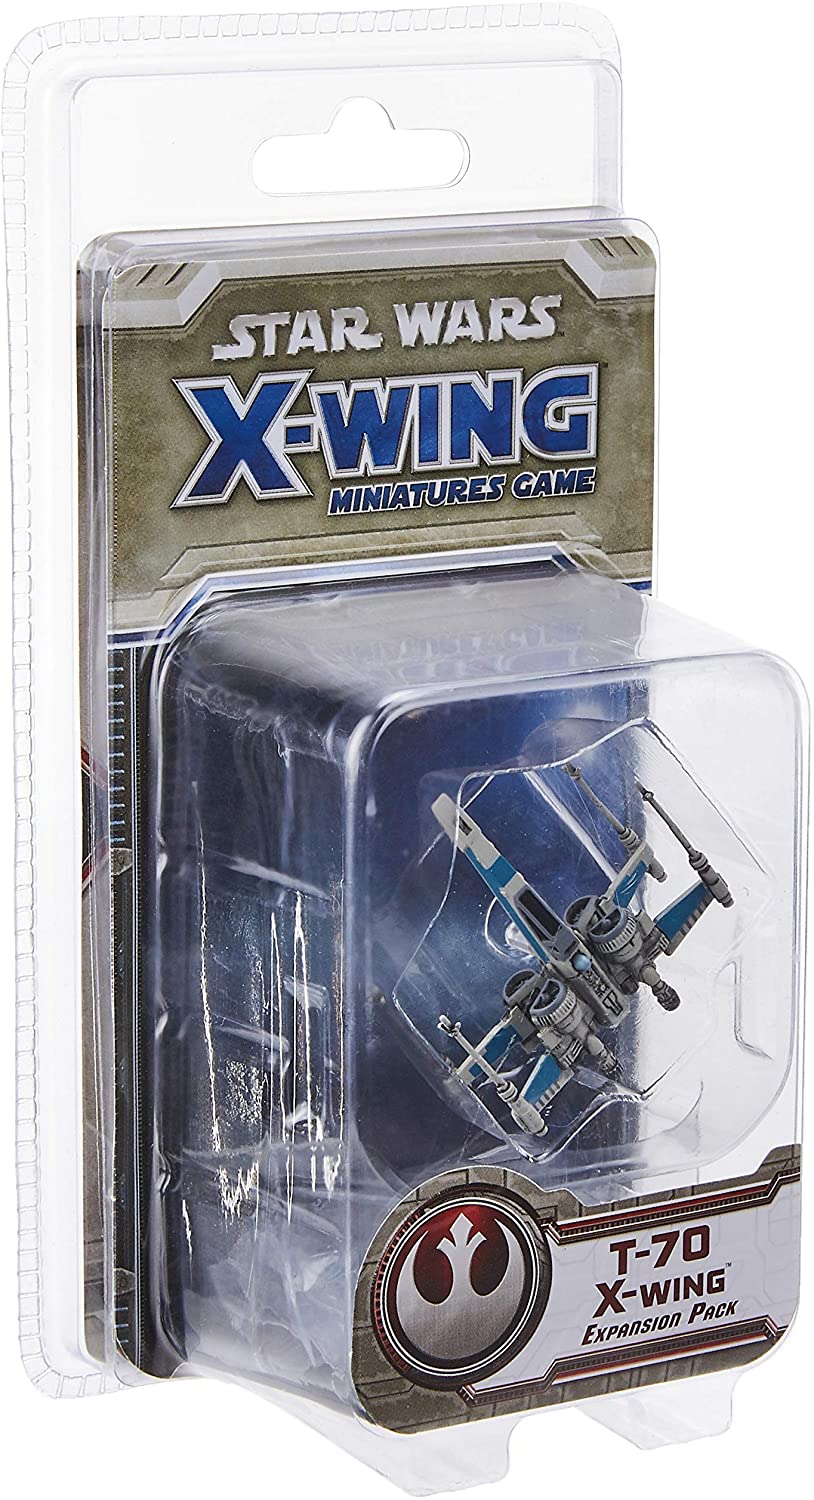 Star Wars X-Wing Miniatures Game: T-70 X-Wing Expansion Pack